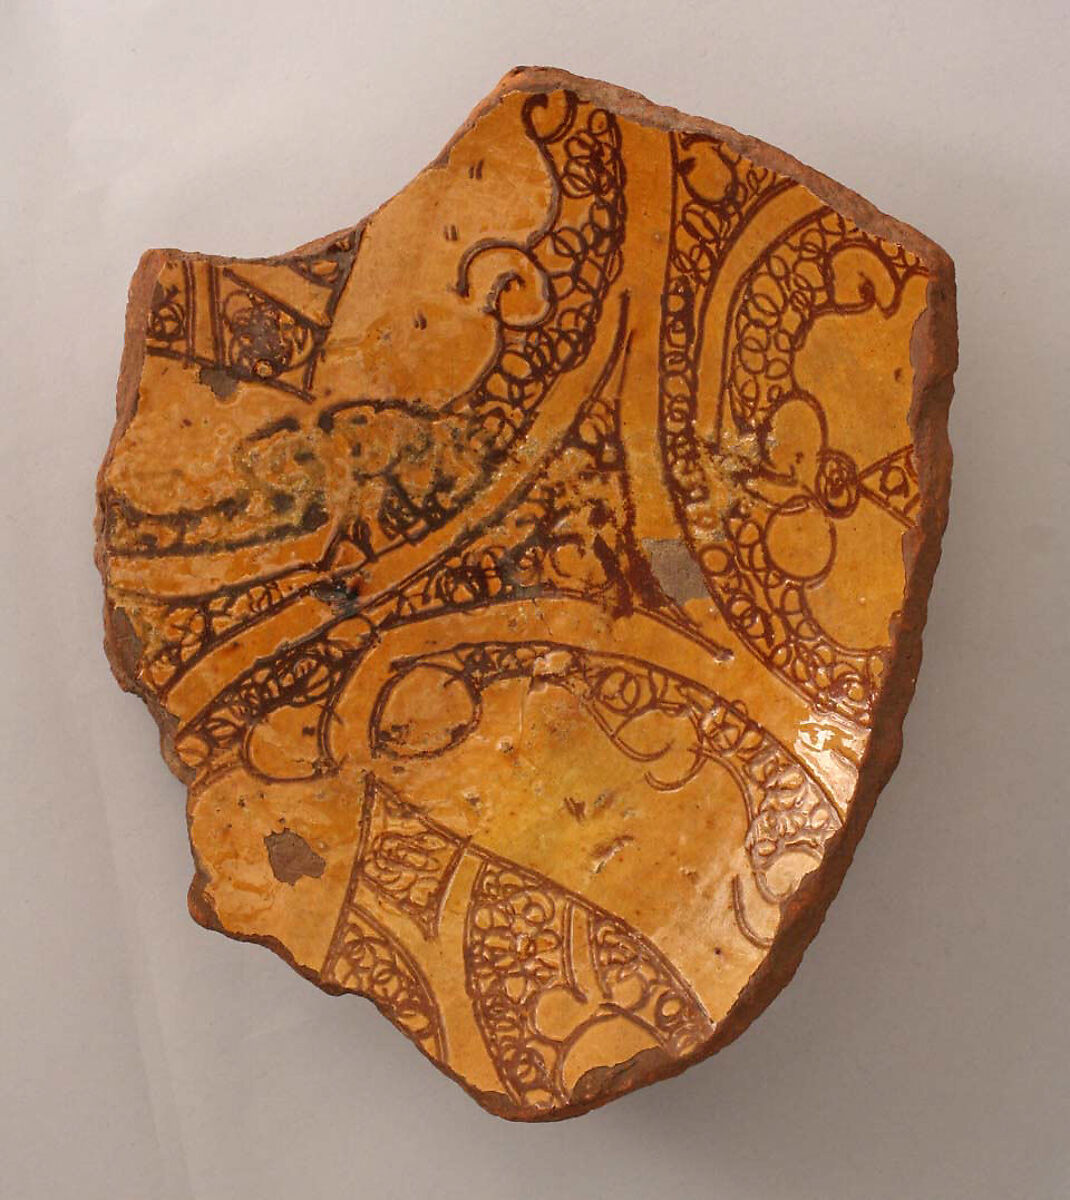 Ceramic Fragment, Earthenware; incised decoration through a white slip and coloring under a transparent glaze. 